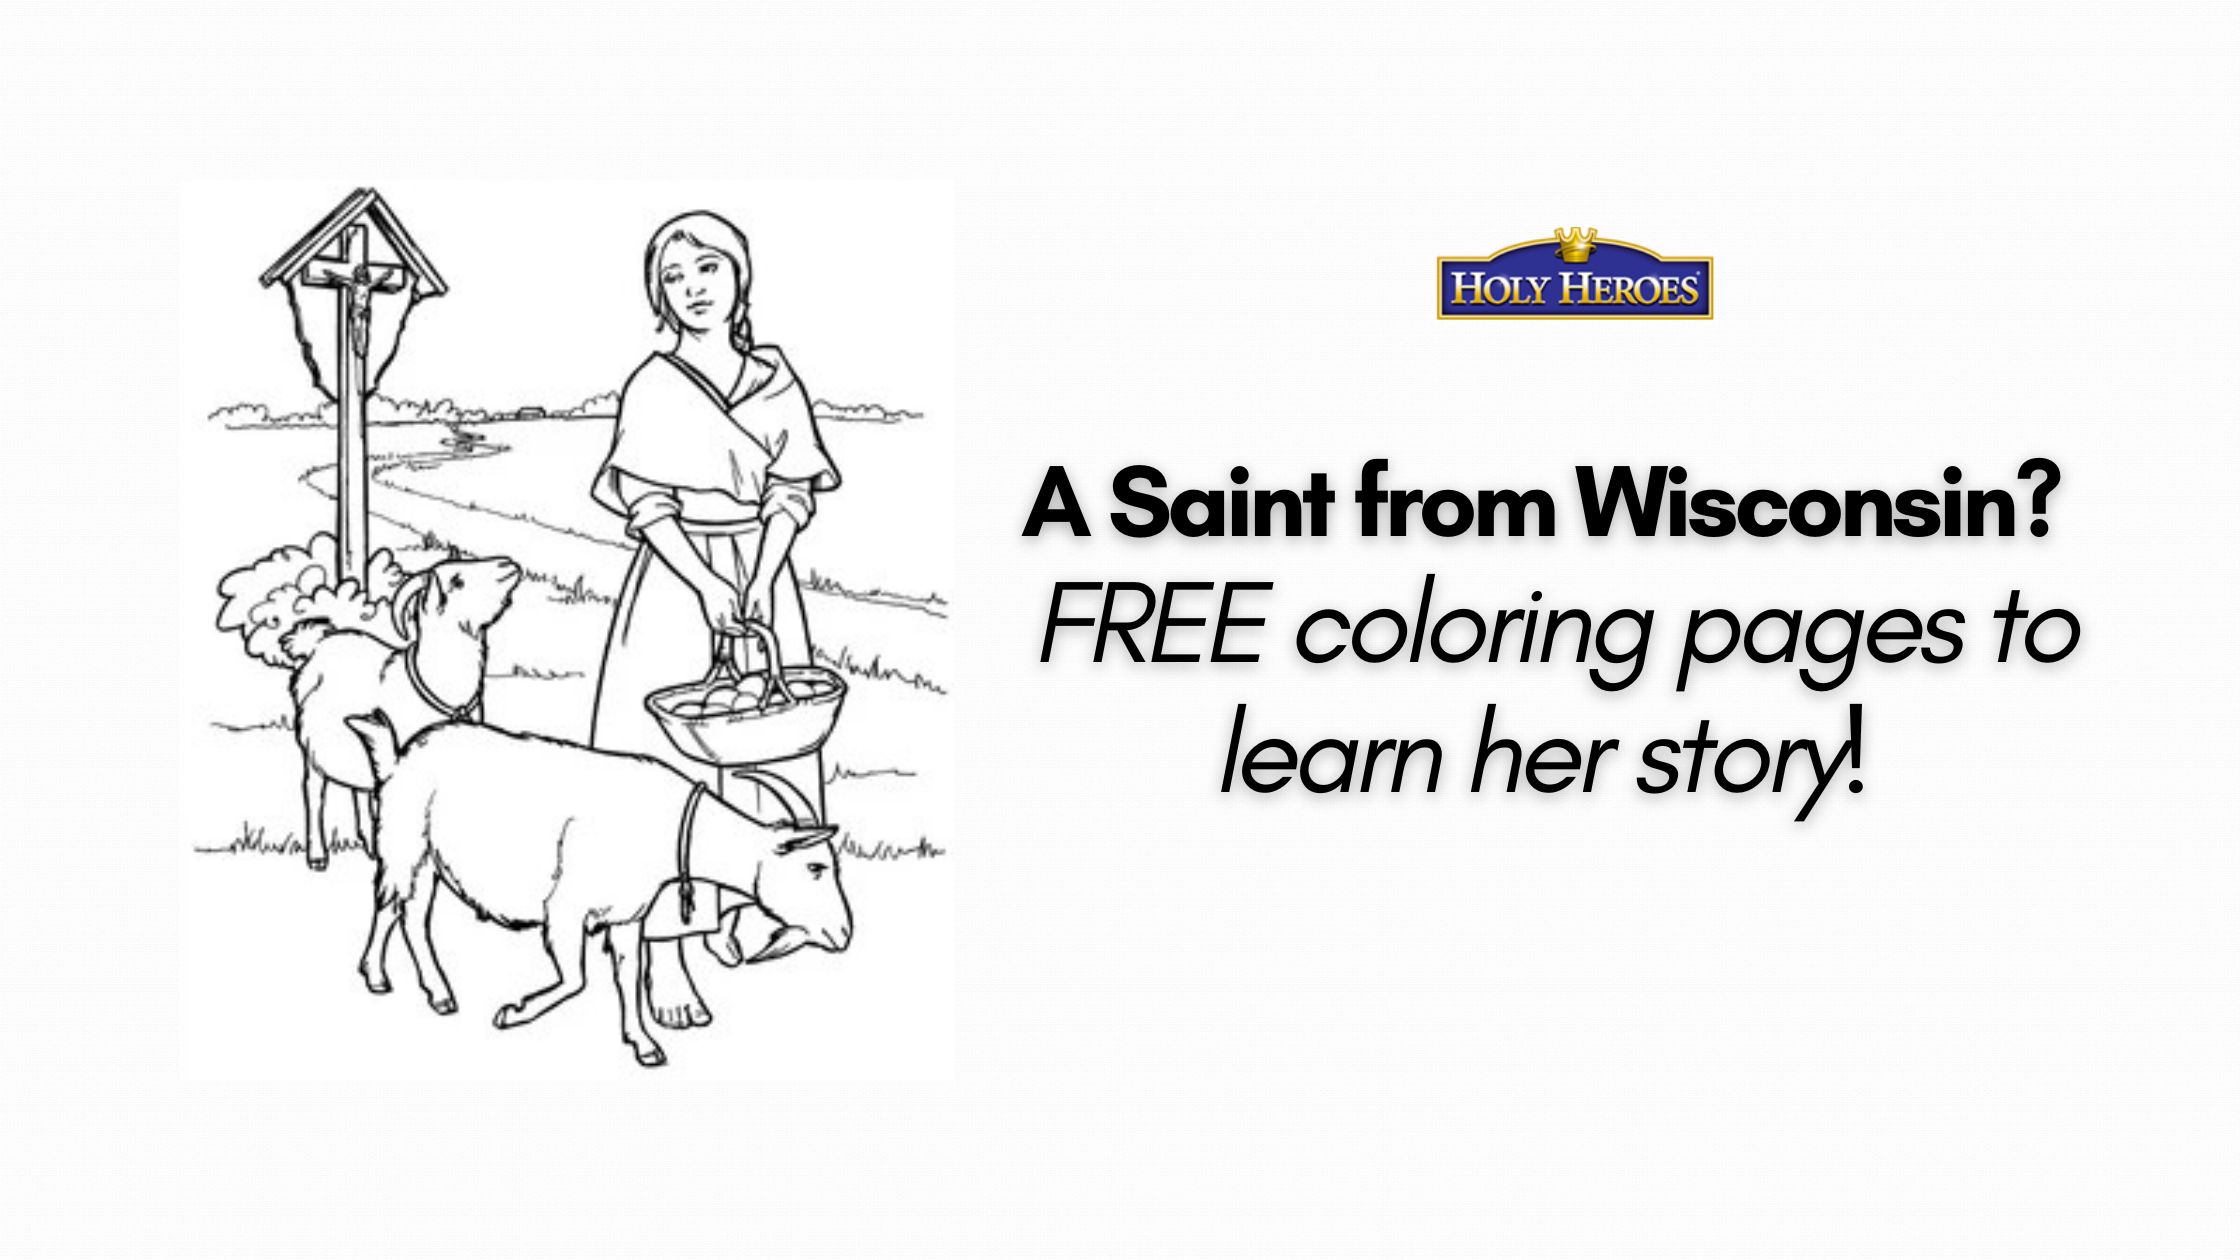 NEW: Woman from Wisconsin is on the way to Sainthood [FREE coloring pages]